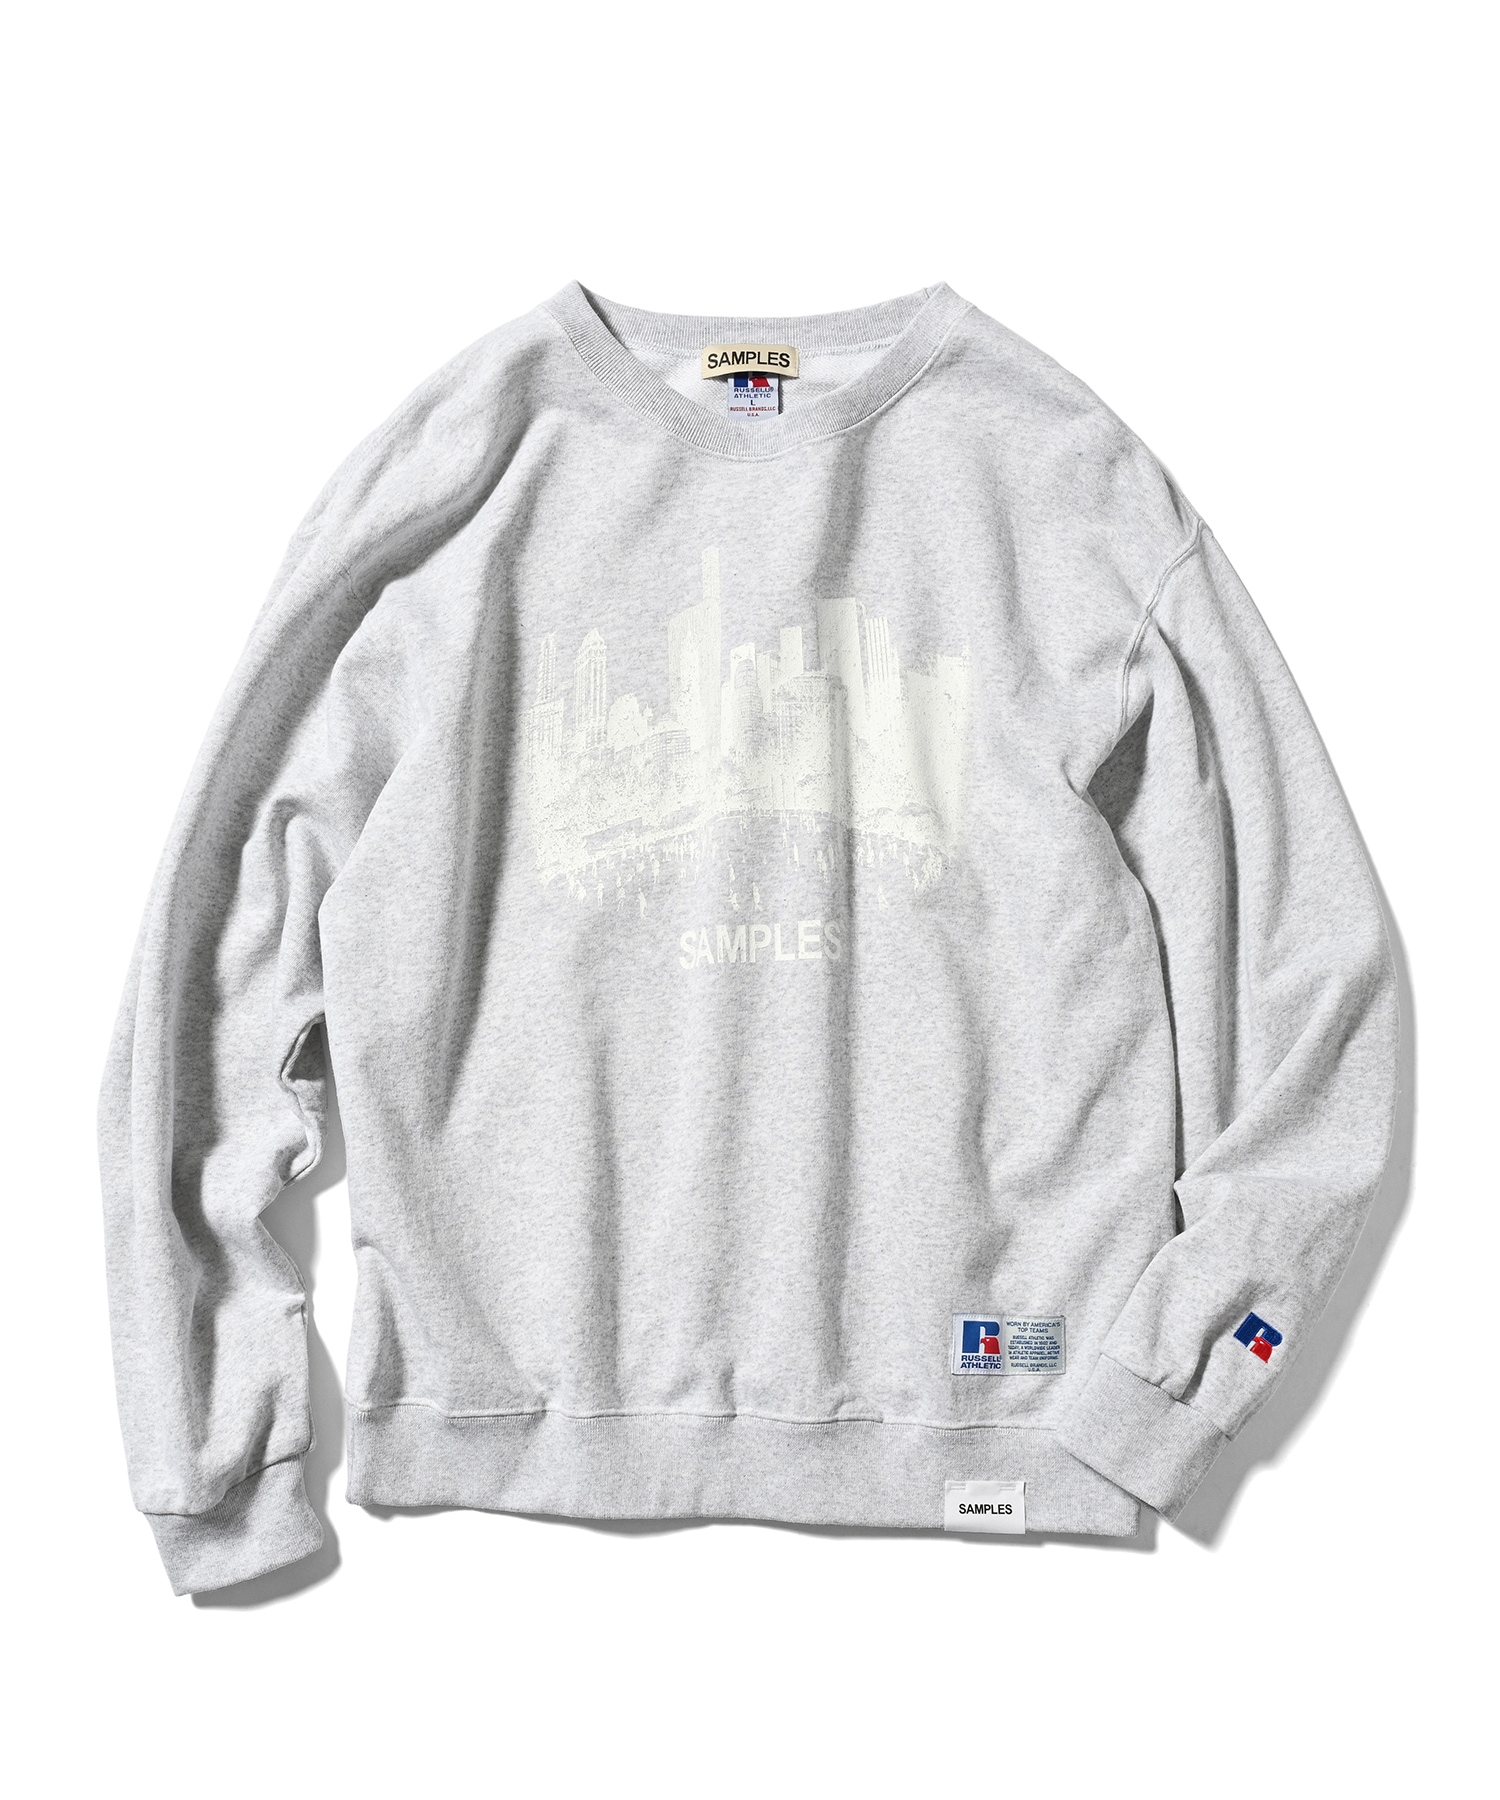 XL SAMPLES × Russell Athletic CREW SWEAT